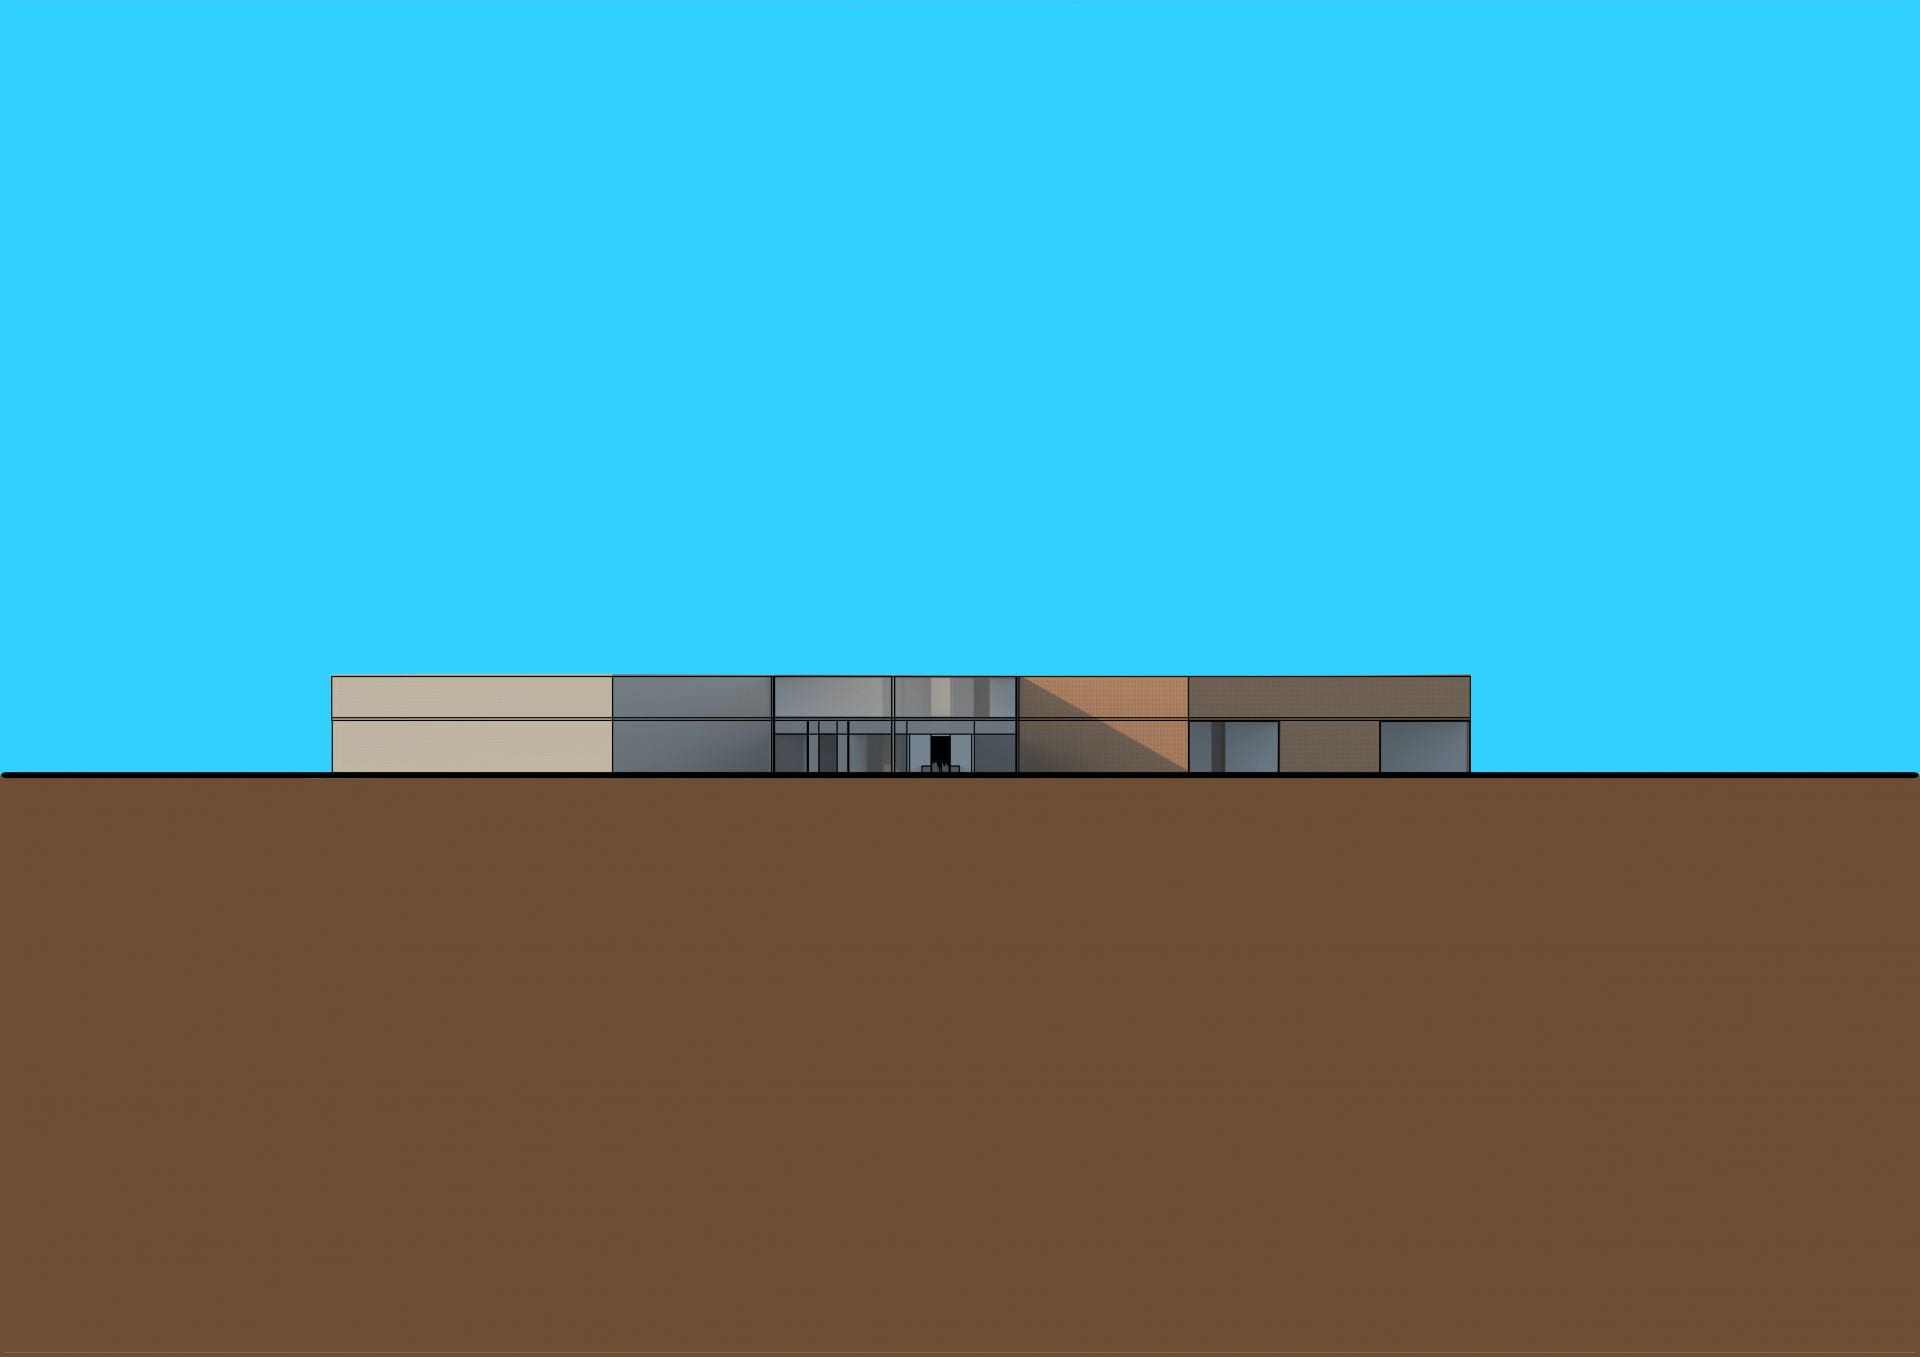 Elevation of my building.